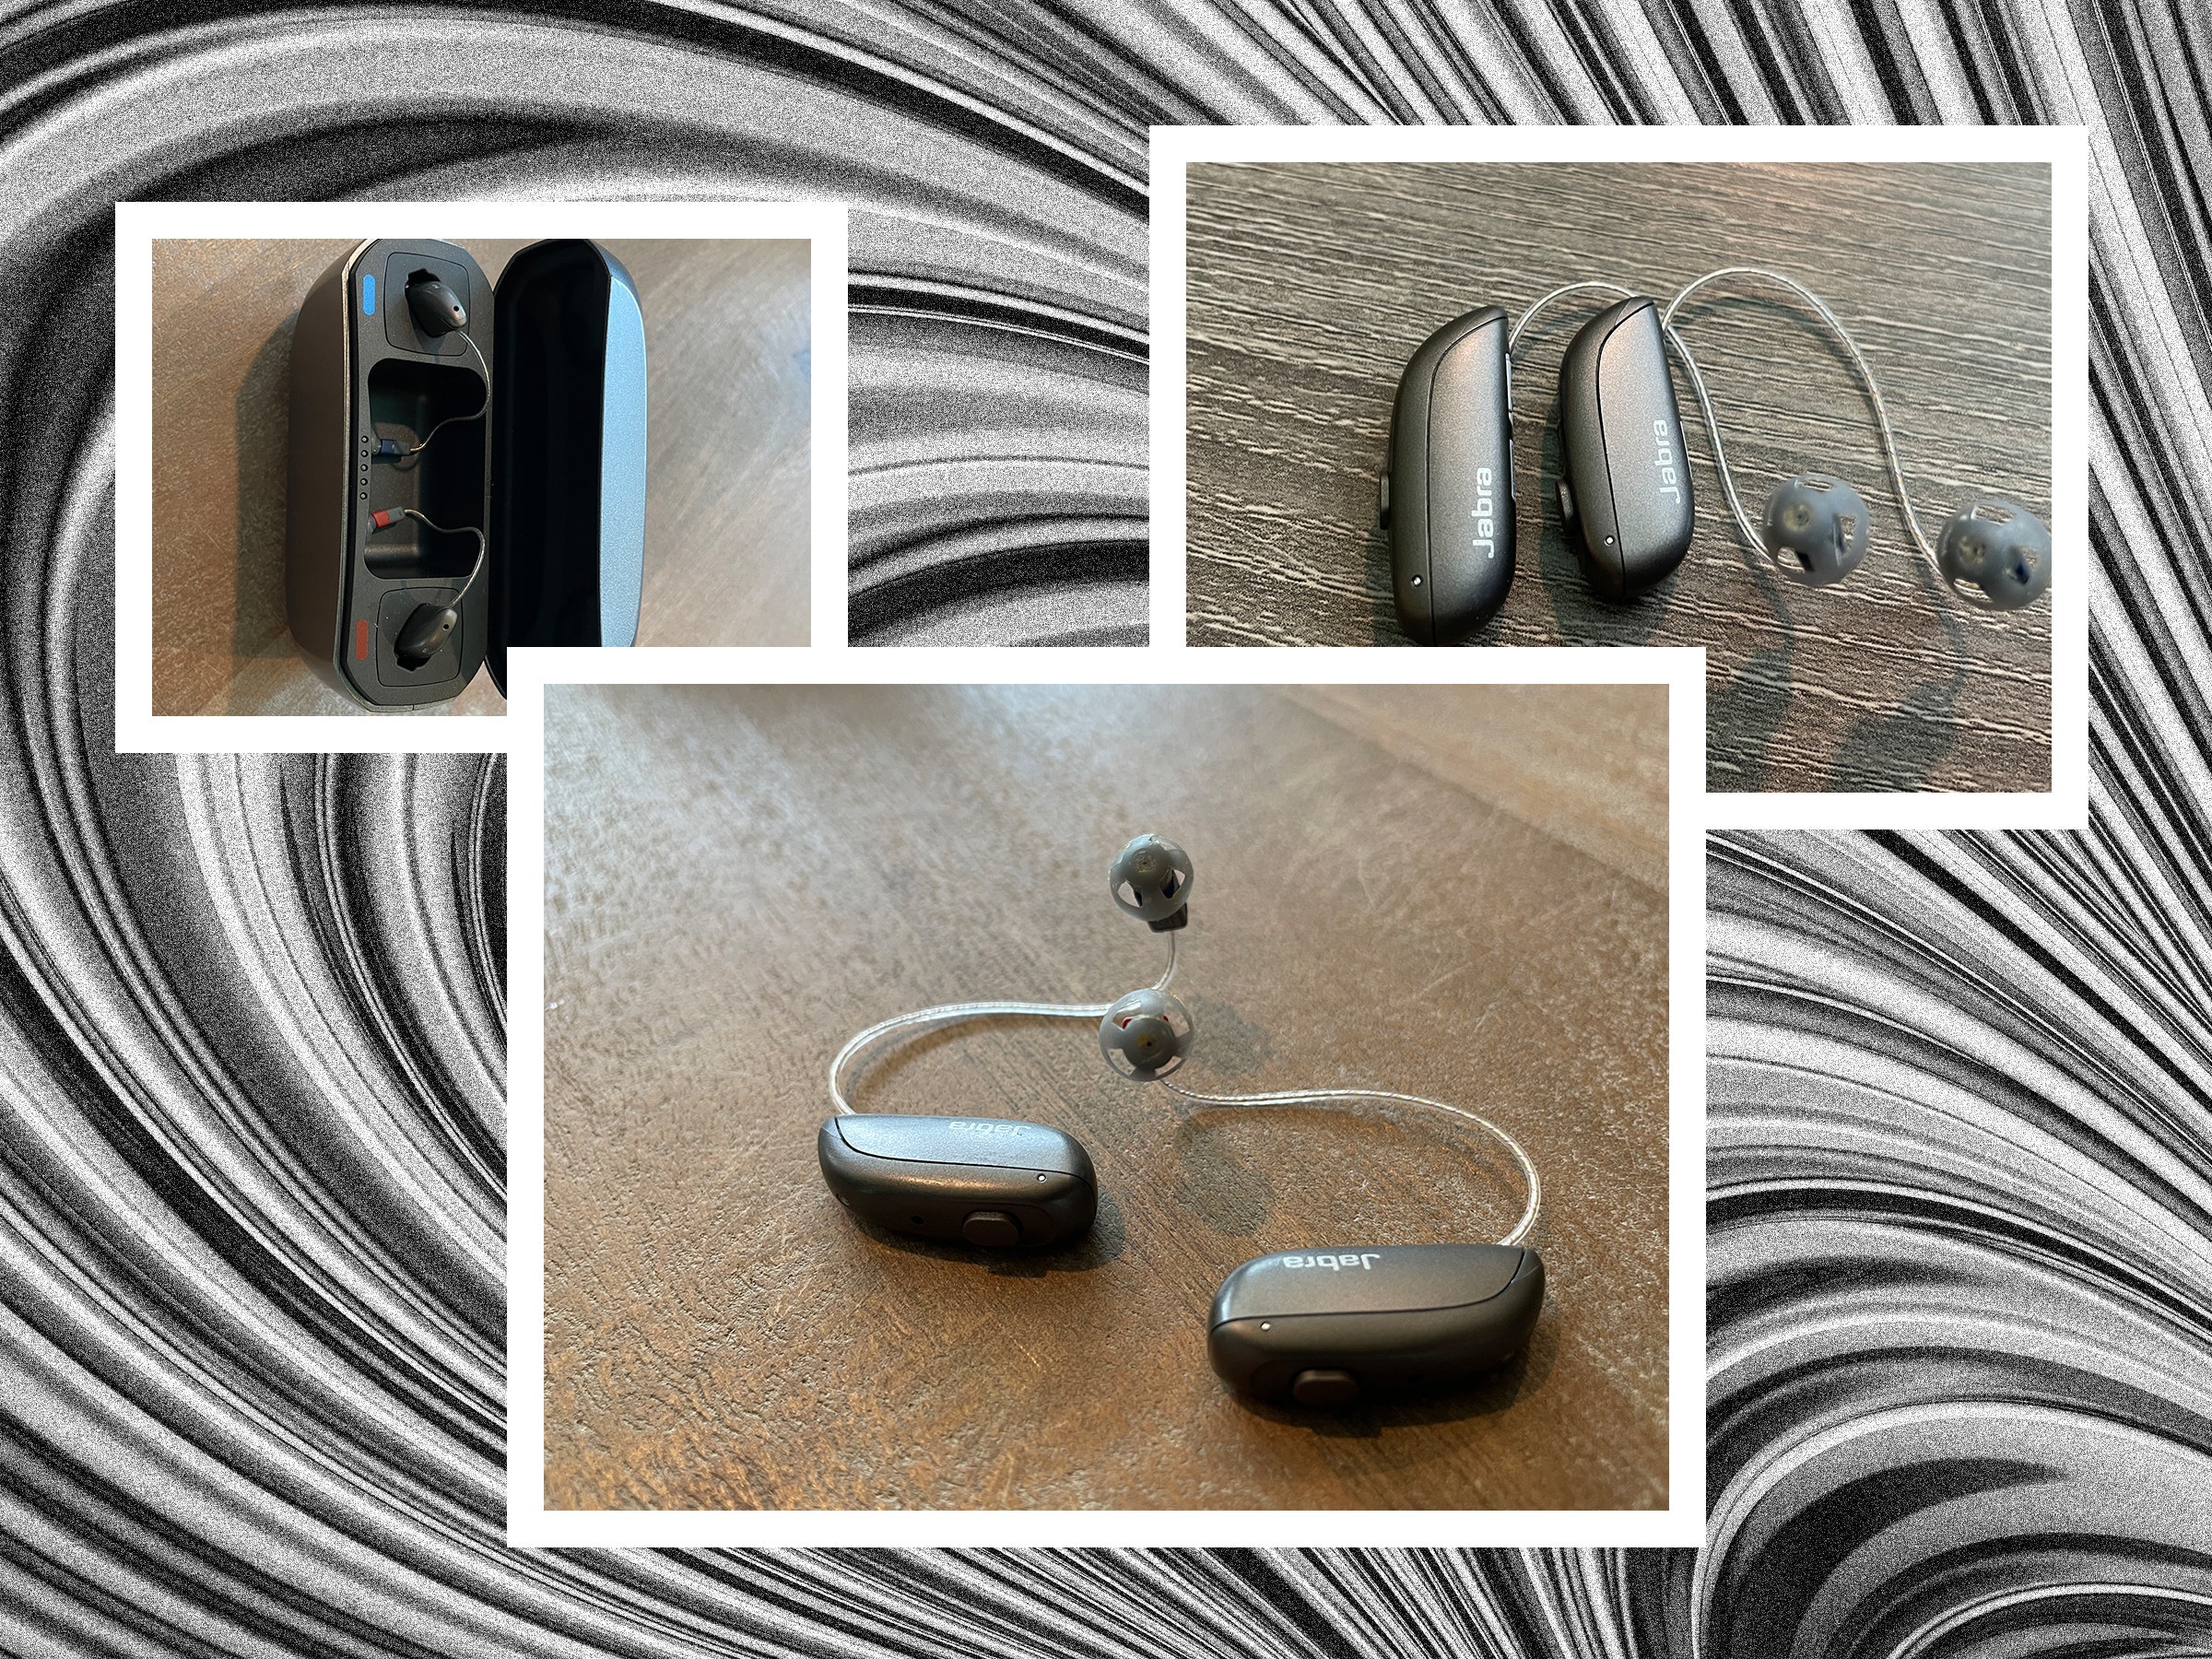 Left to right Case holding hearing aids two hearing aids on wooden surface and two hearing aides side by side